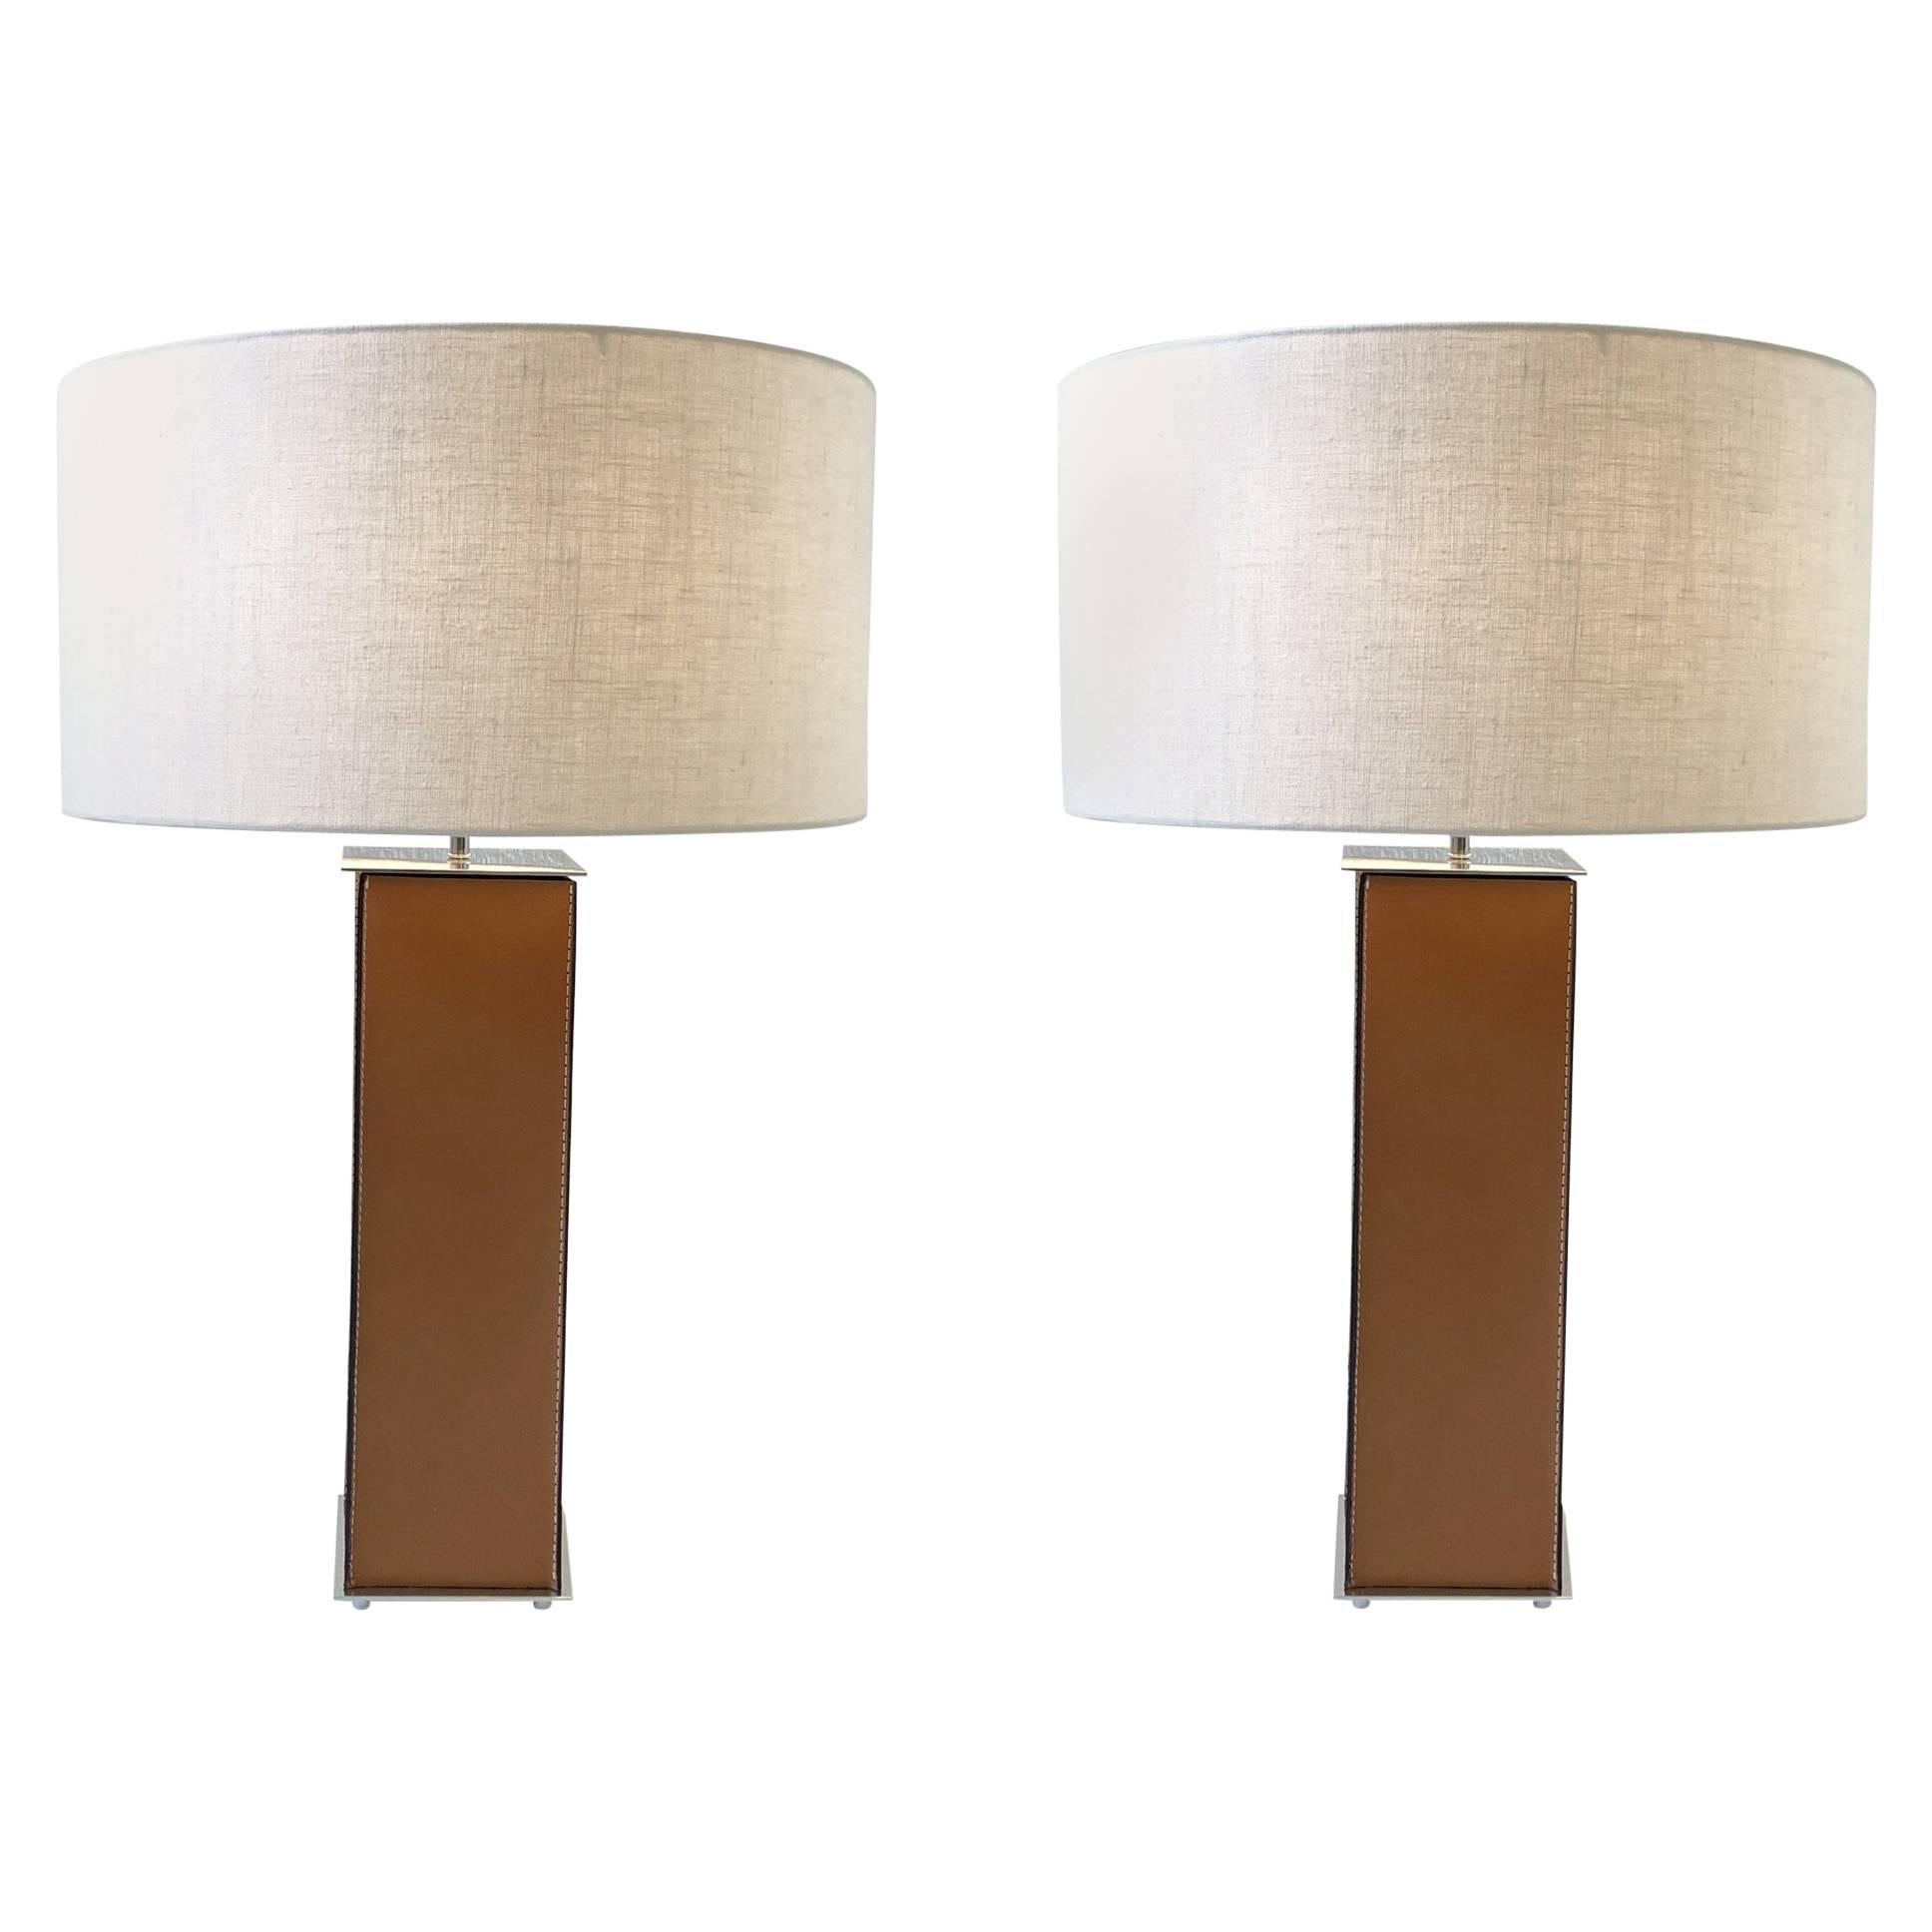 Pair of Saddle Stitch Leather Table Lamps by Laurel